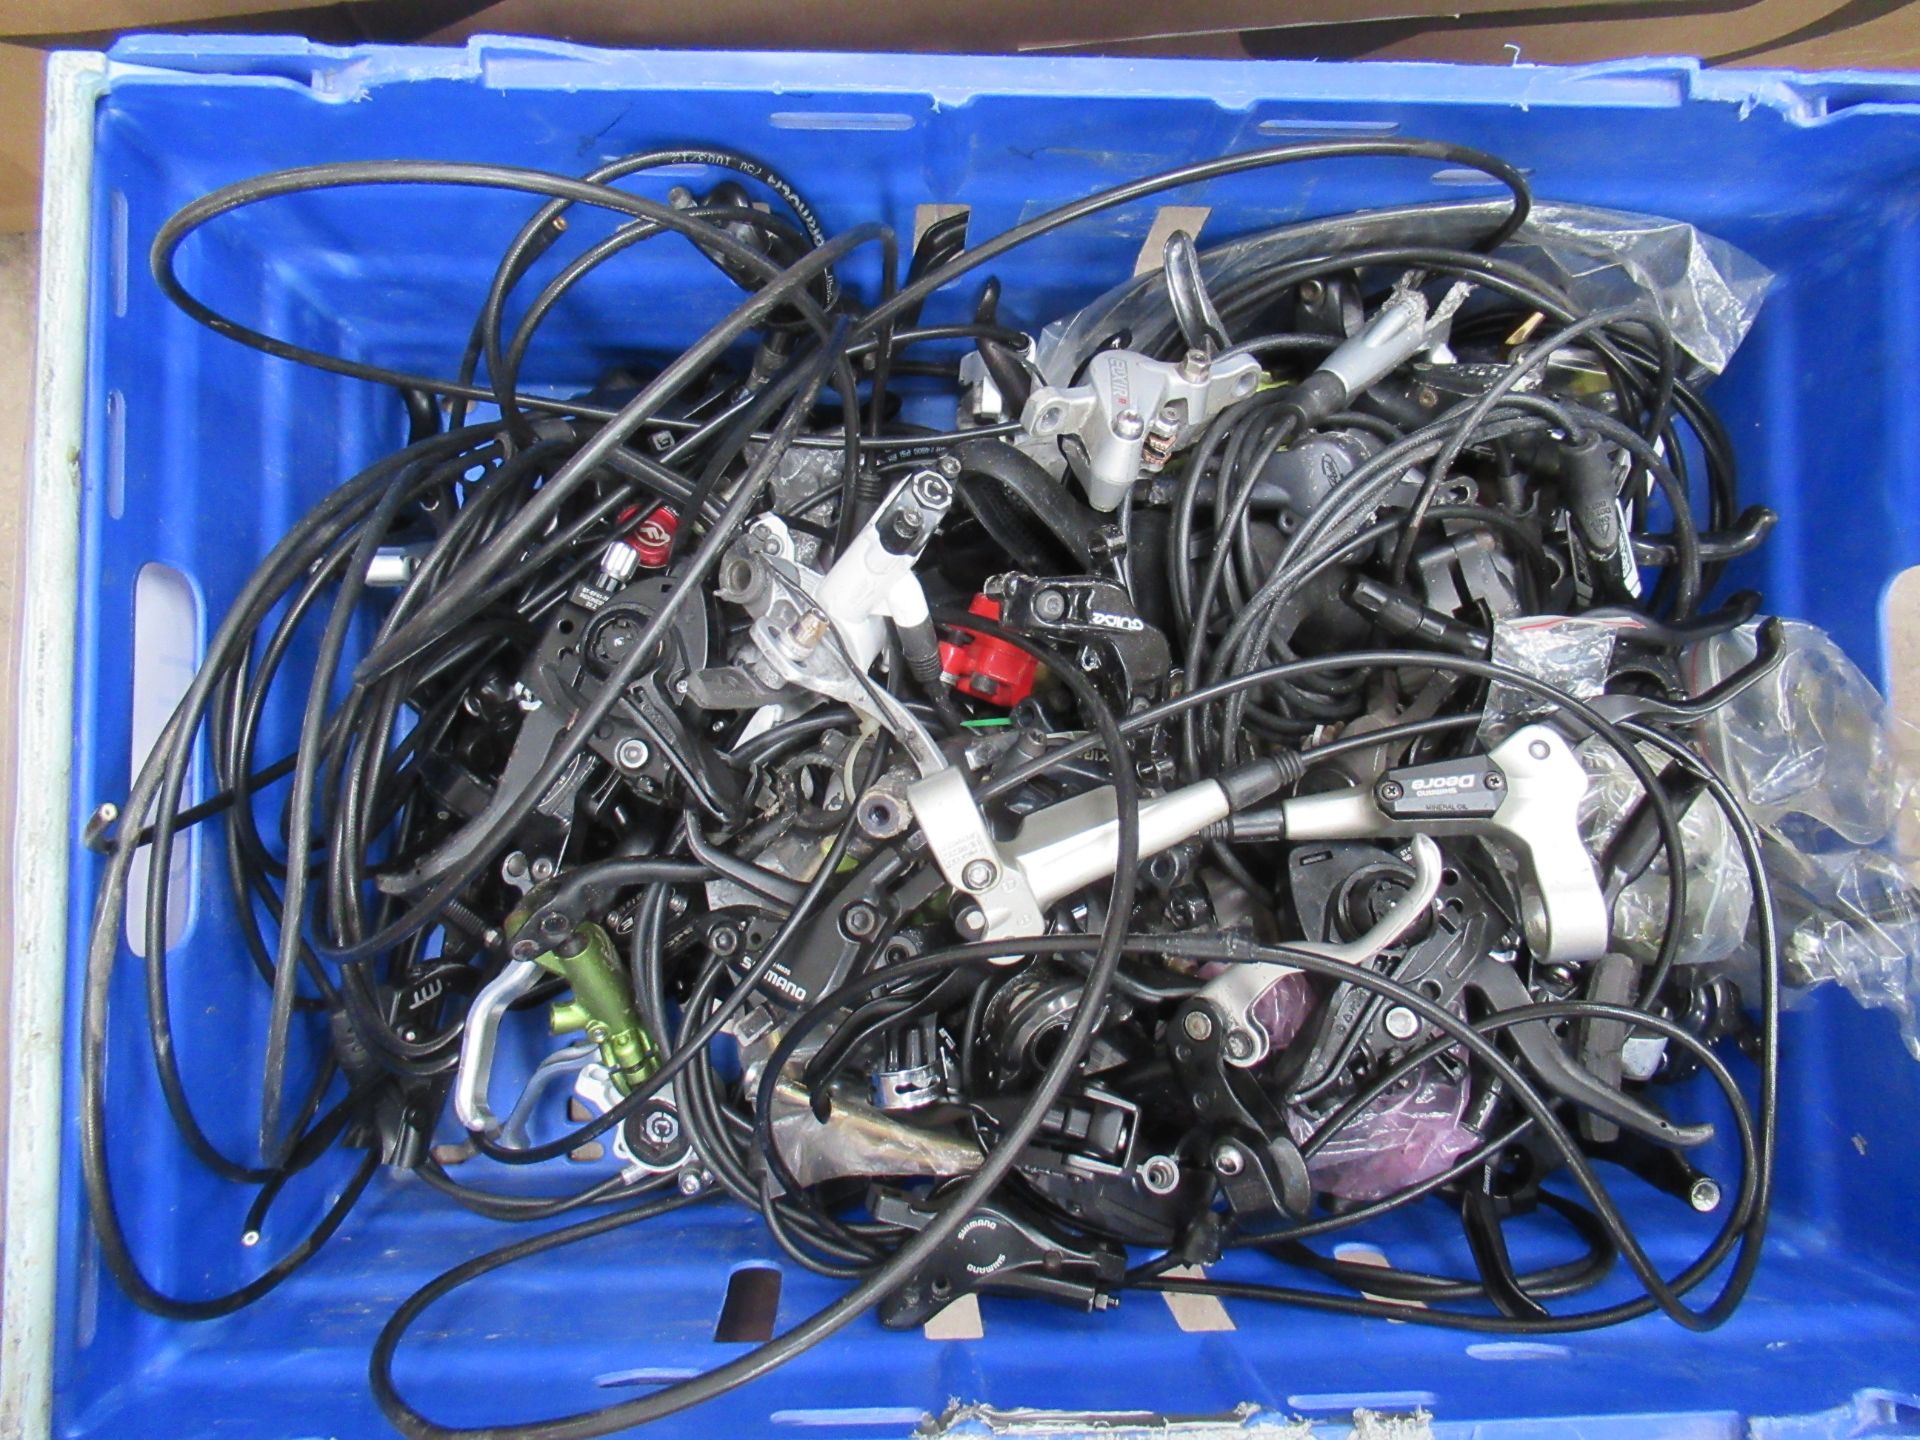 Contents of box including used hydraulic brake systems